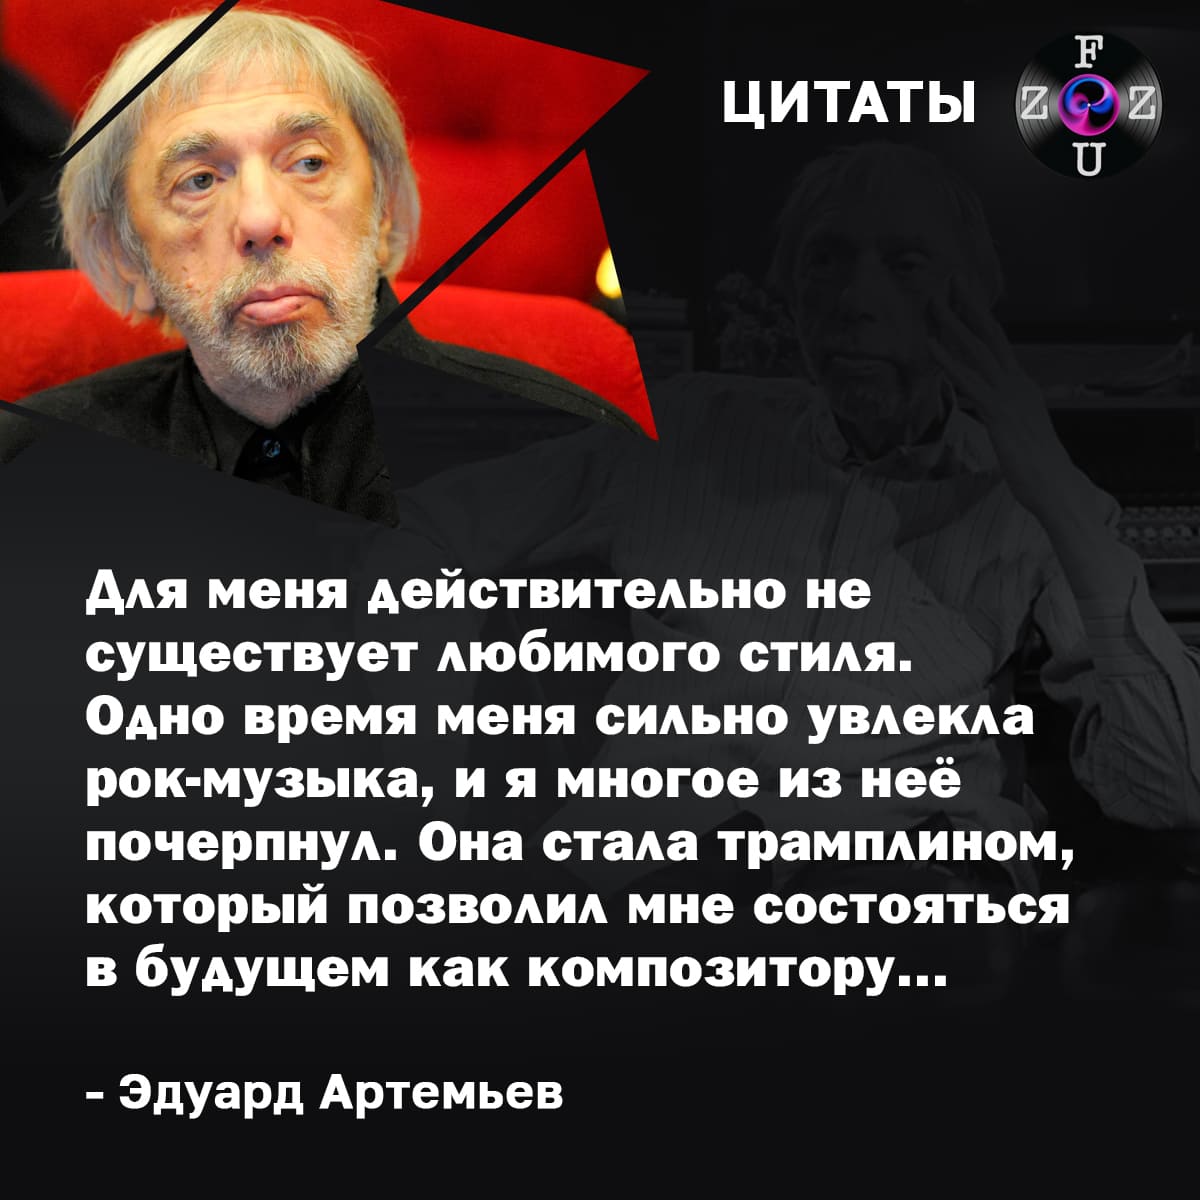 Quotes by Eduard Artemyev